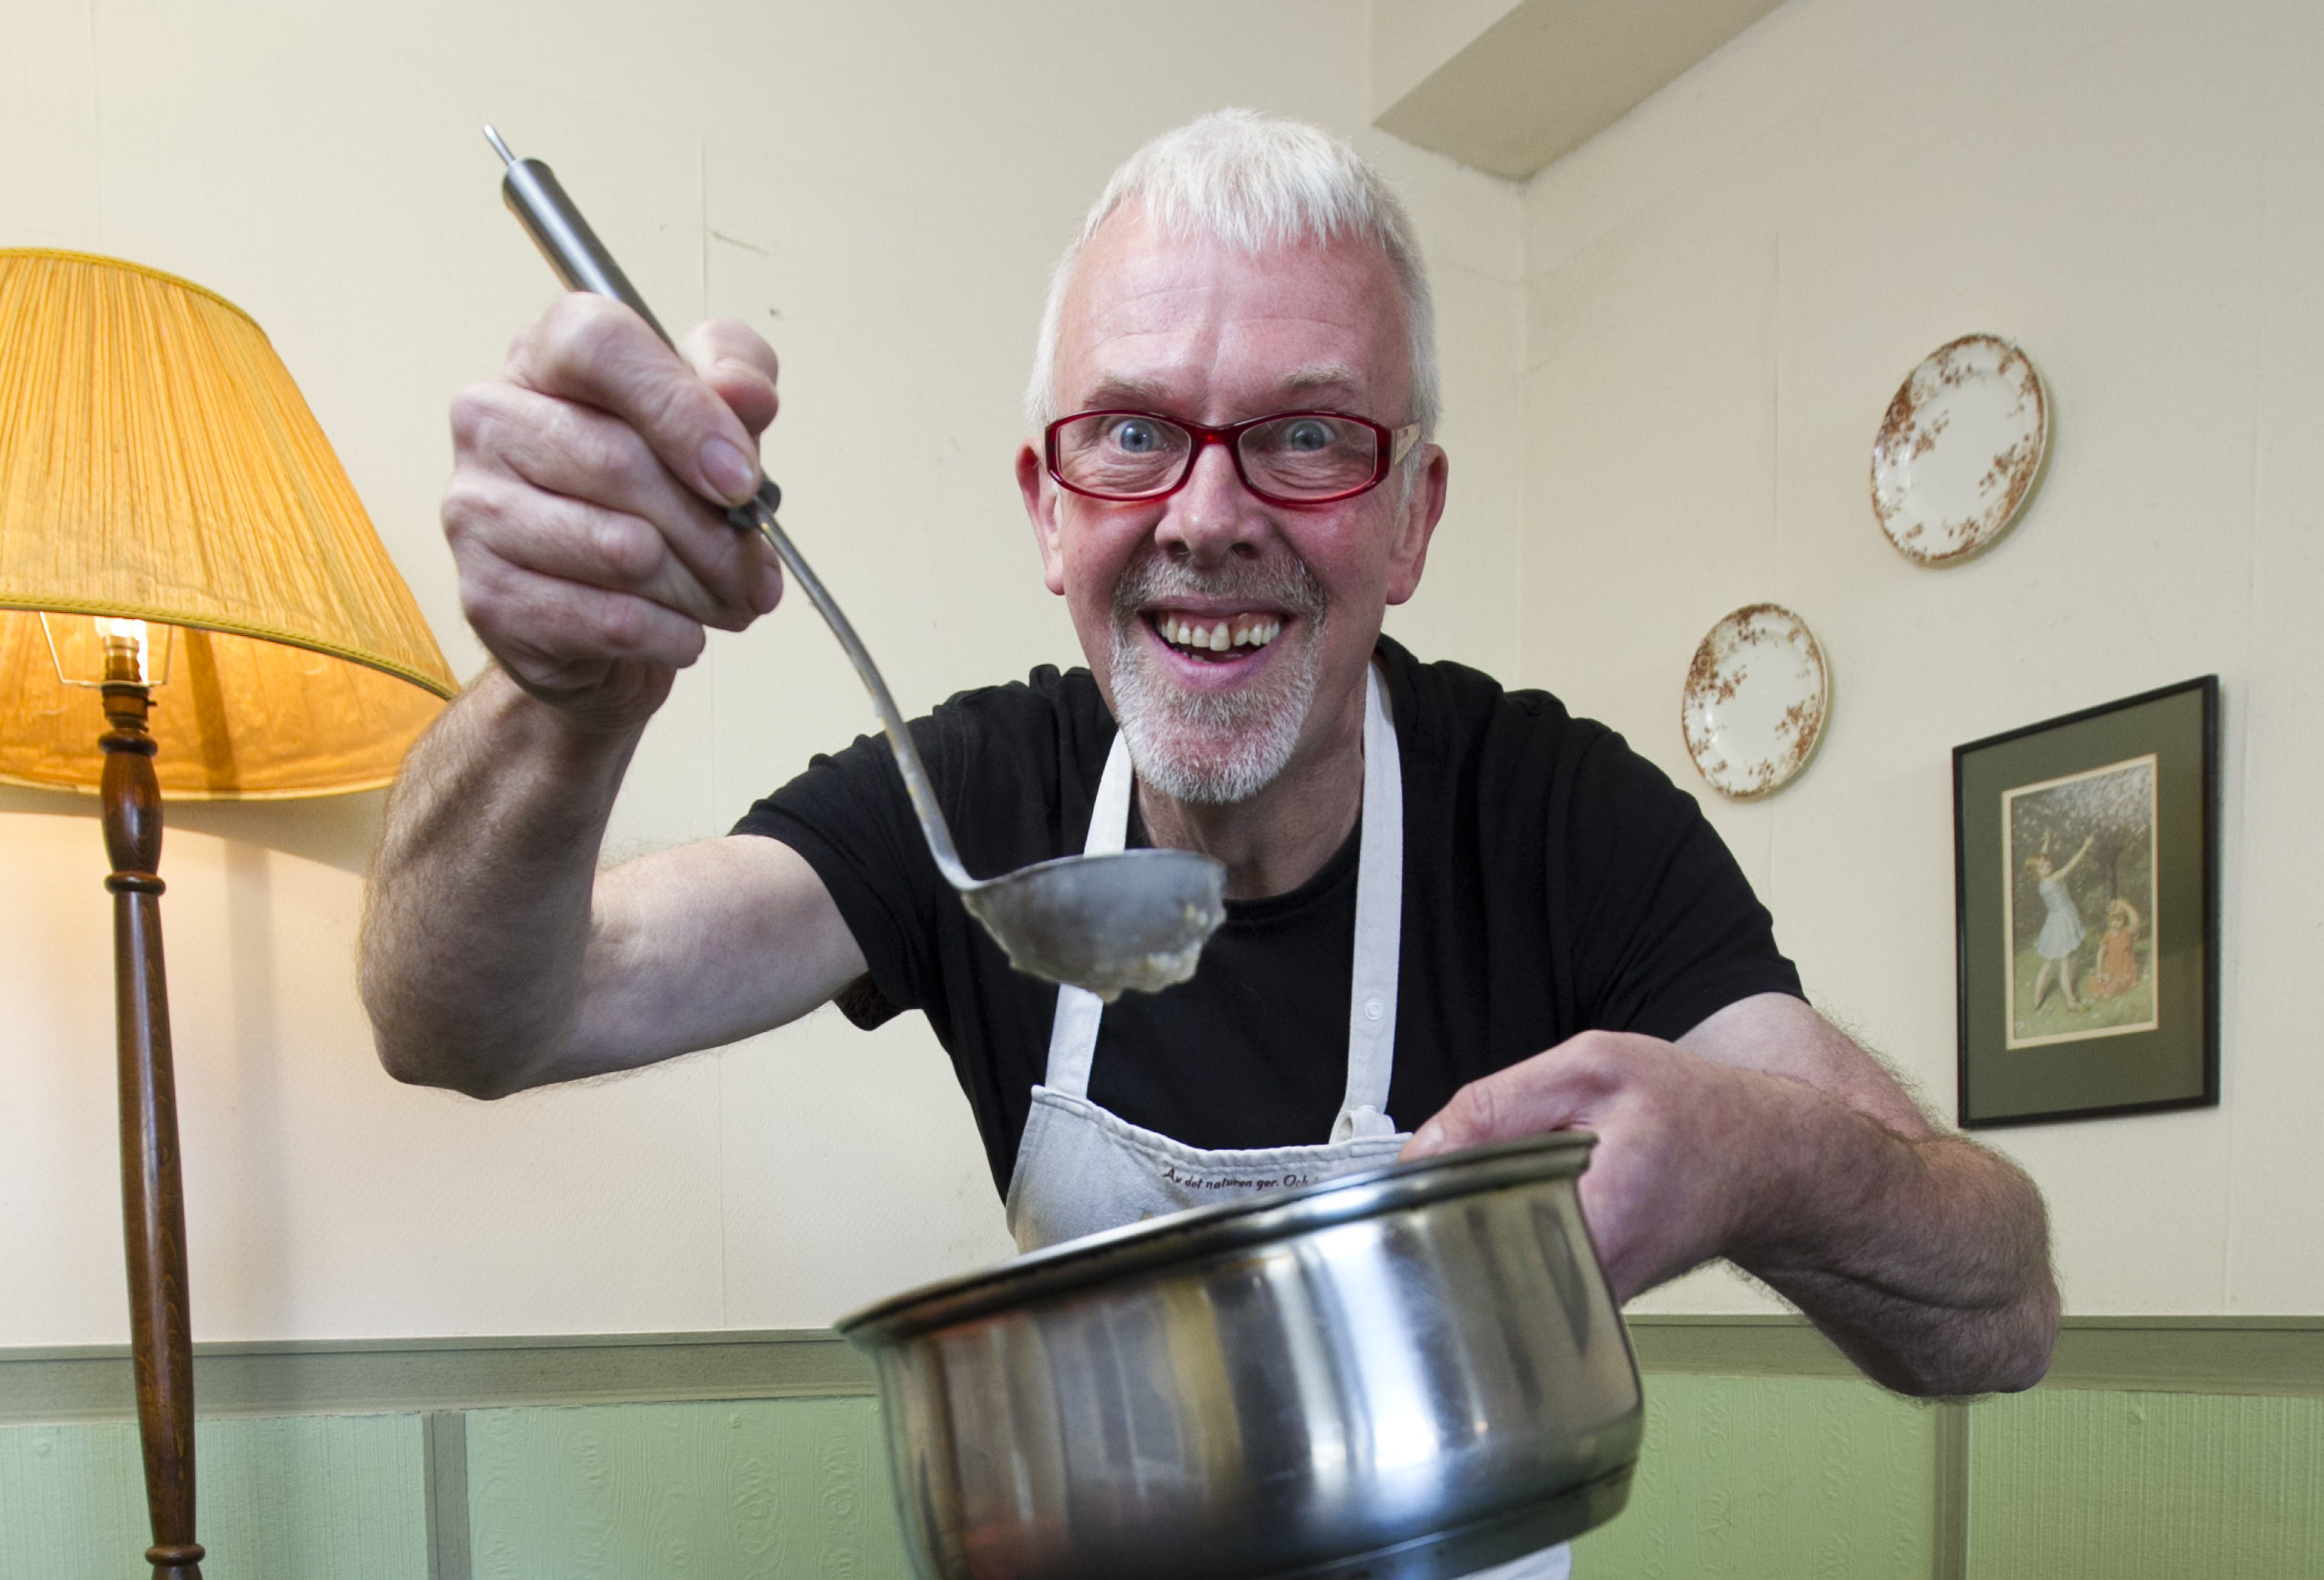 Former champion, Neal Robertson, is one of the 30 hopefuls wanting to win the 25th World Porridge Making Championships. (Andrew Cawley)